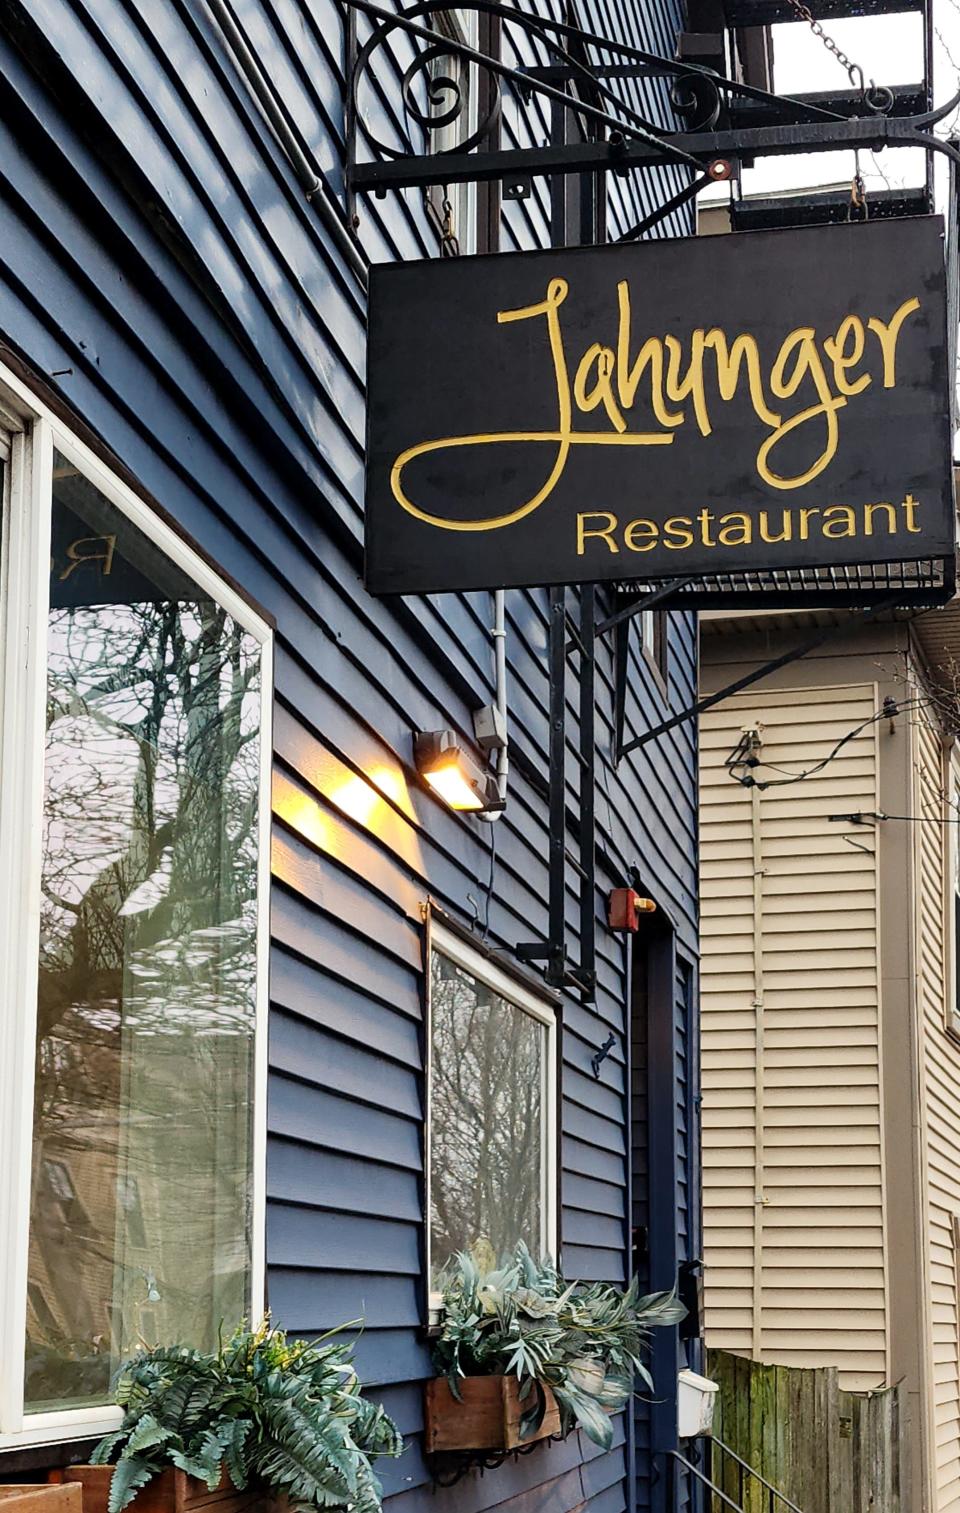 Find Jahunger at 333 Wickenden St. in Providence.